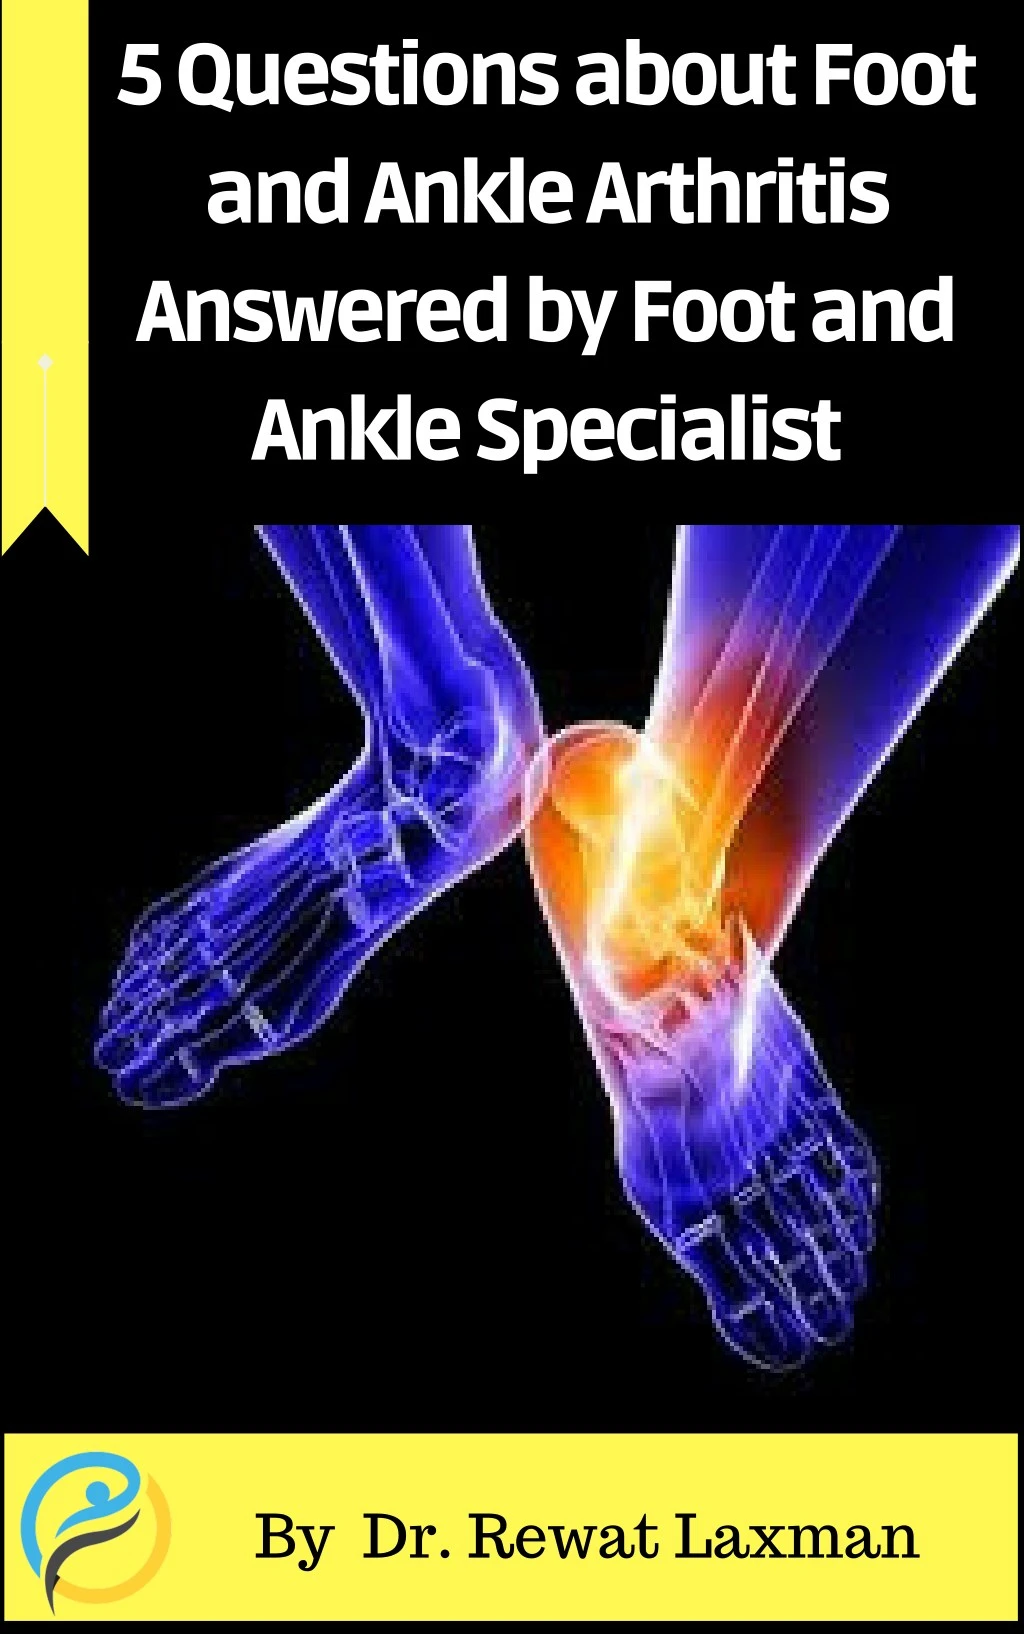 5 questions about foot and ankle arthritis